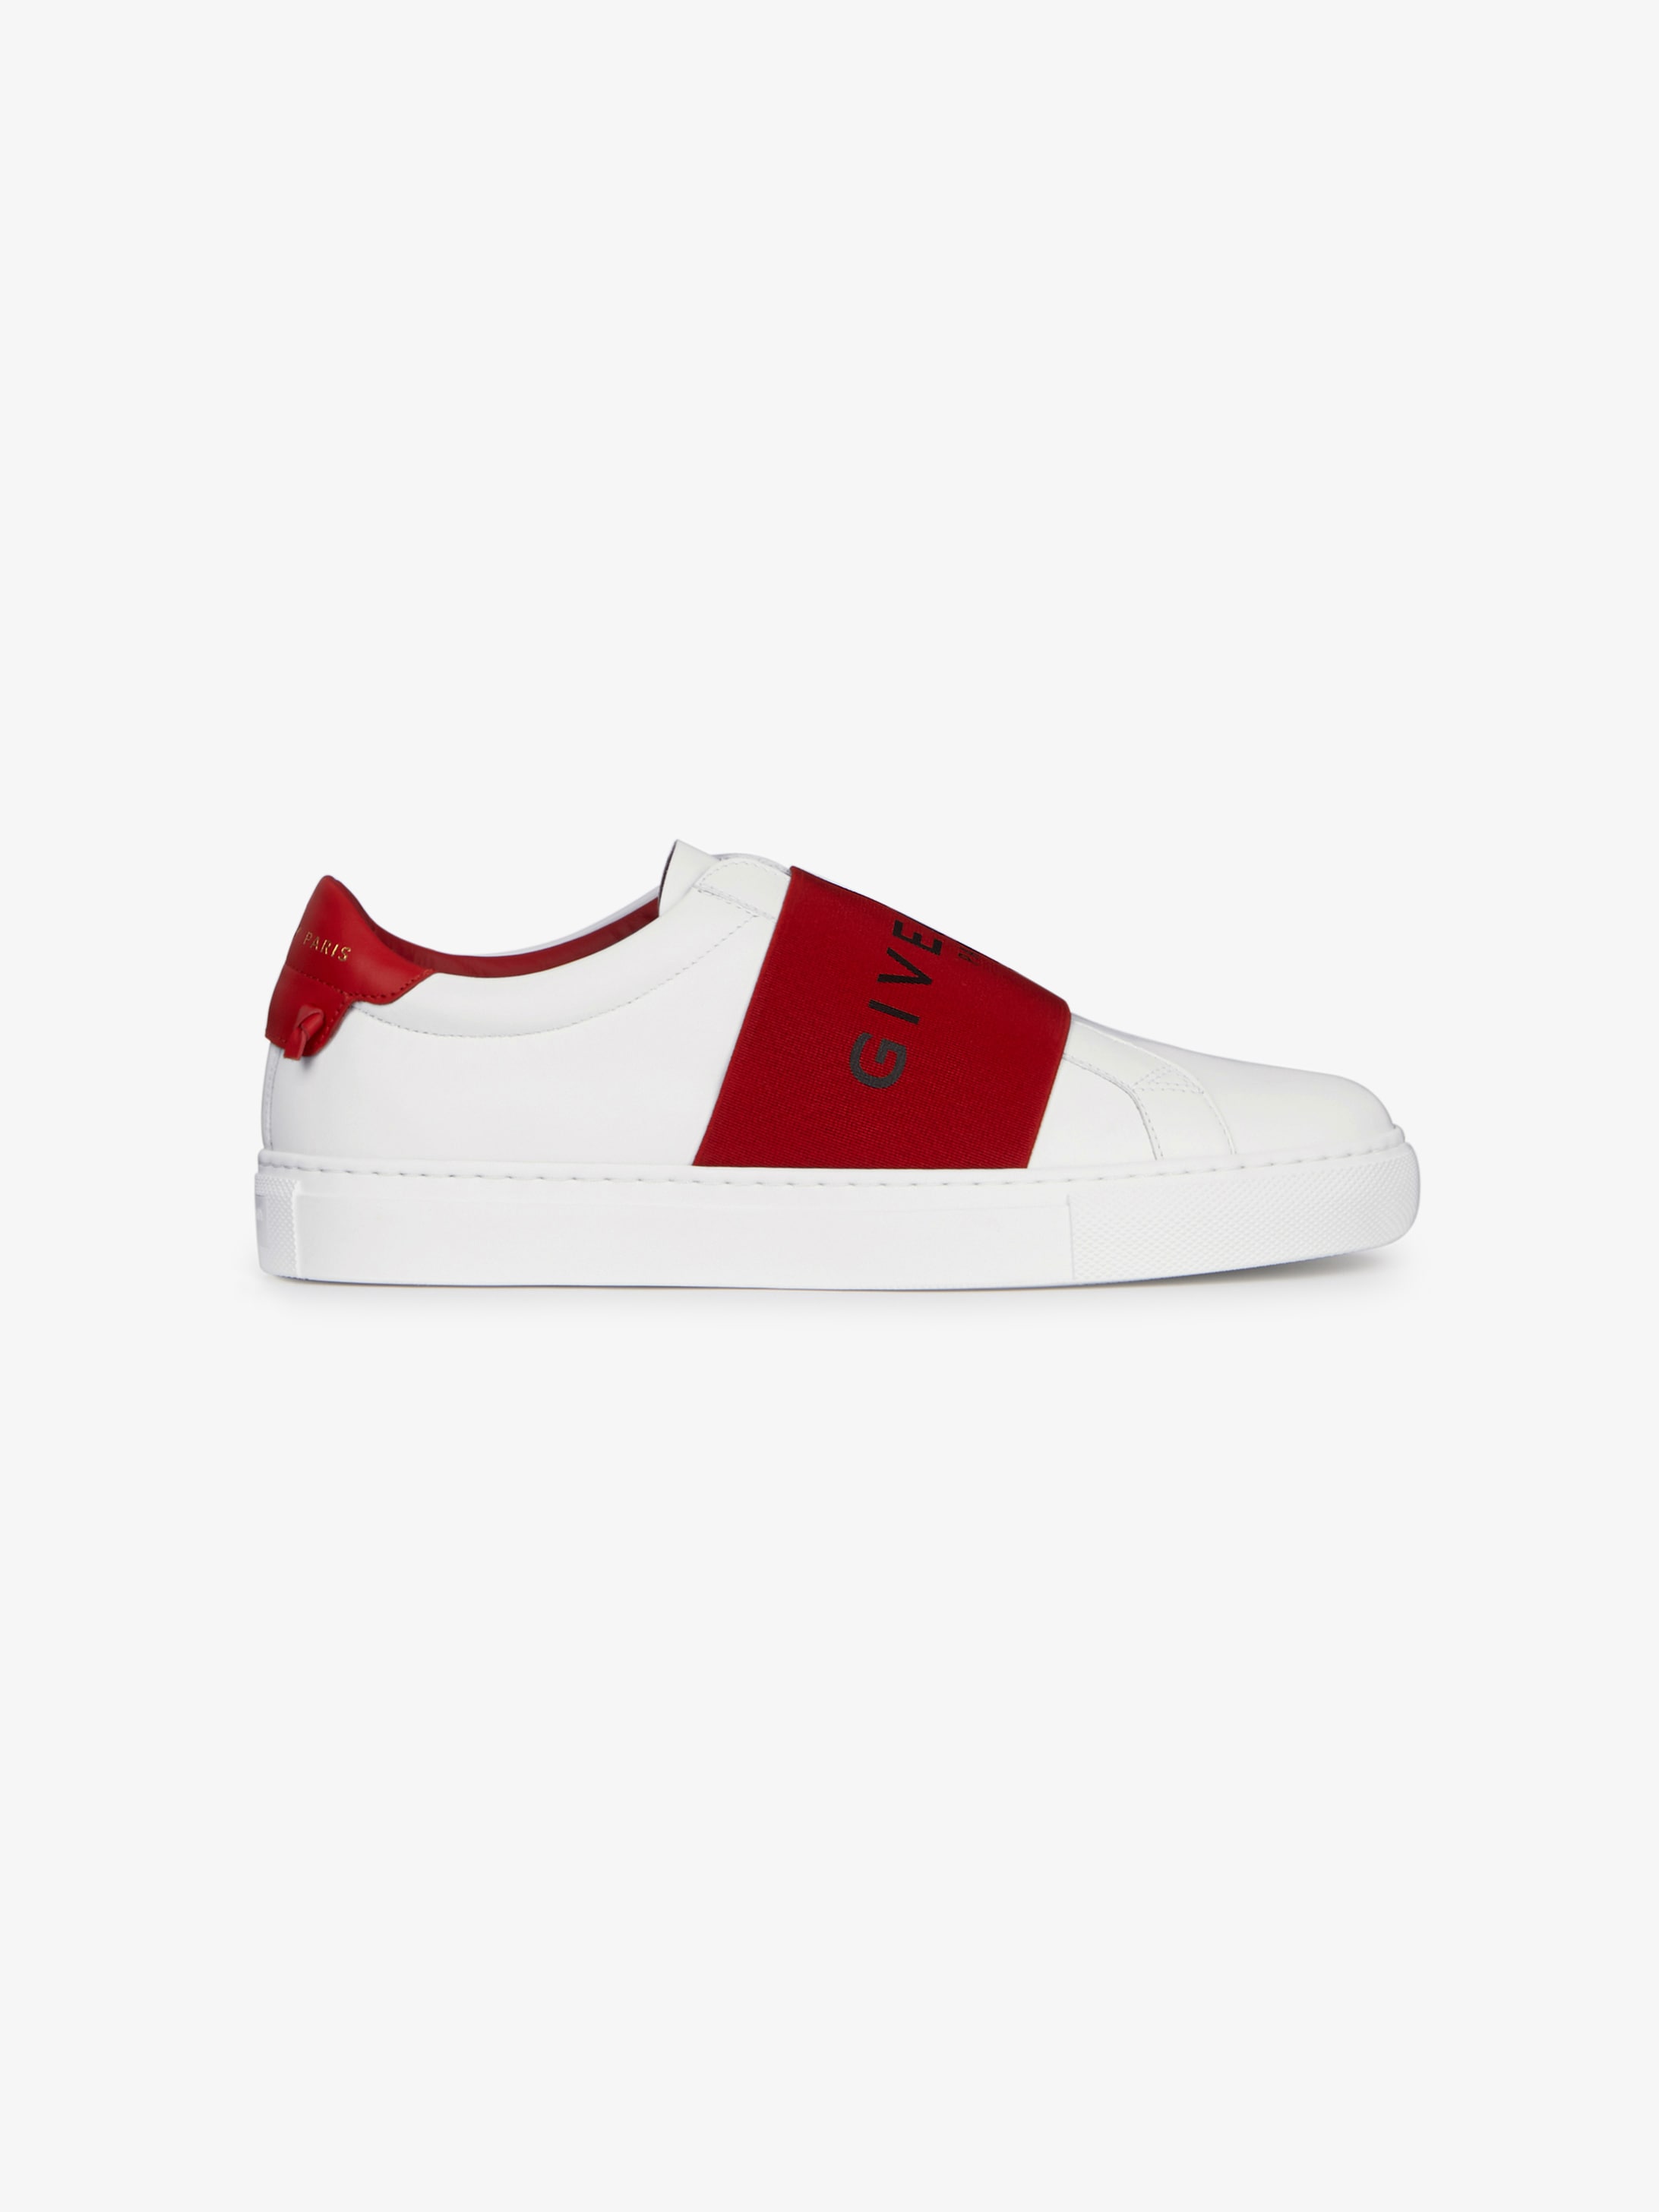 GIVENCHY PARIS webbing sneakers in 